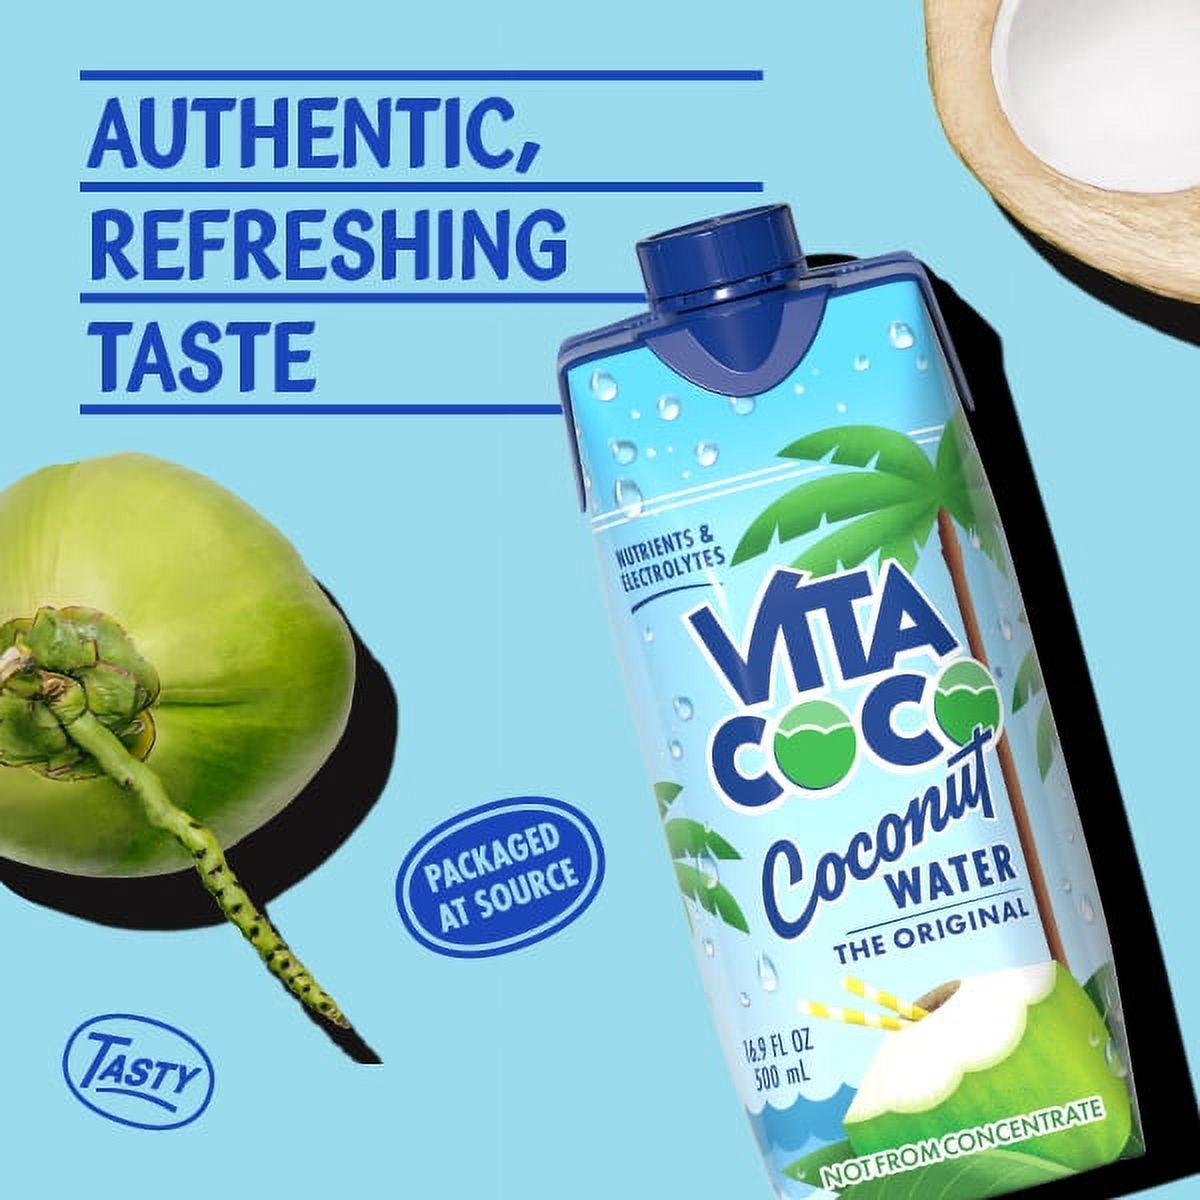 Vita Coco The Original Coconut Water, Nutrients & Electrolytes Rich, Pure, 16.9 fl oz Tetra, 4-Pack - image 3 of 8